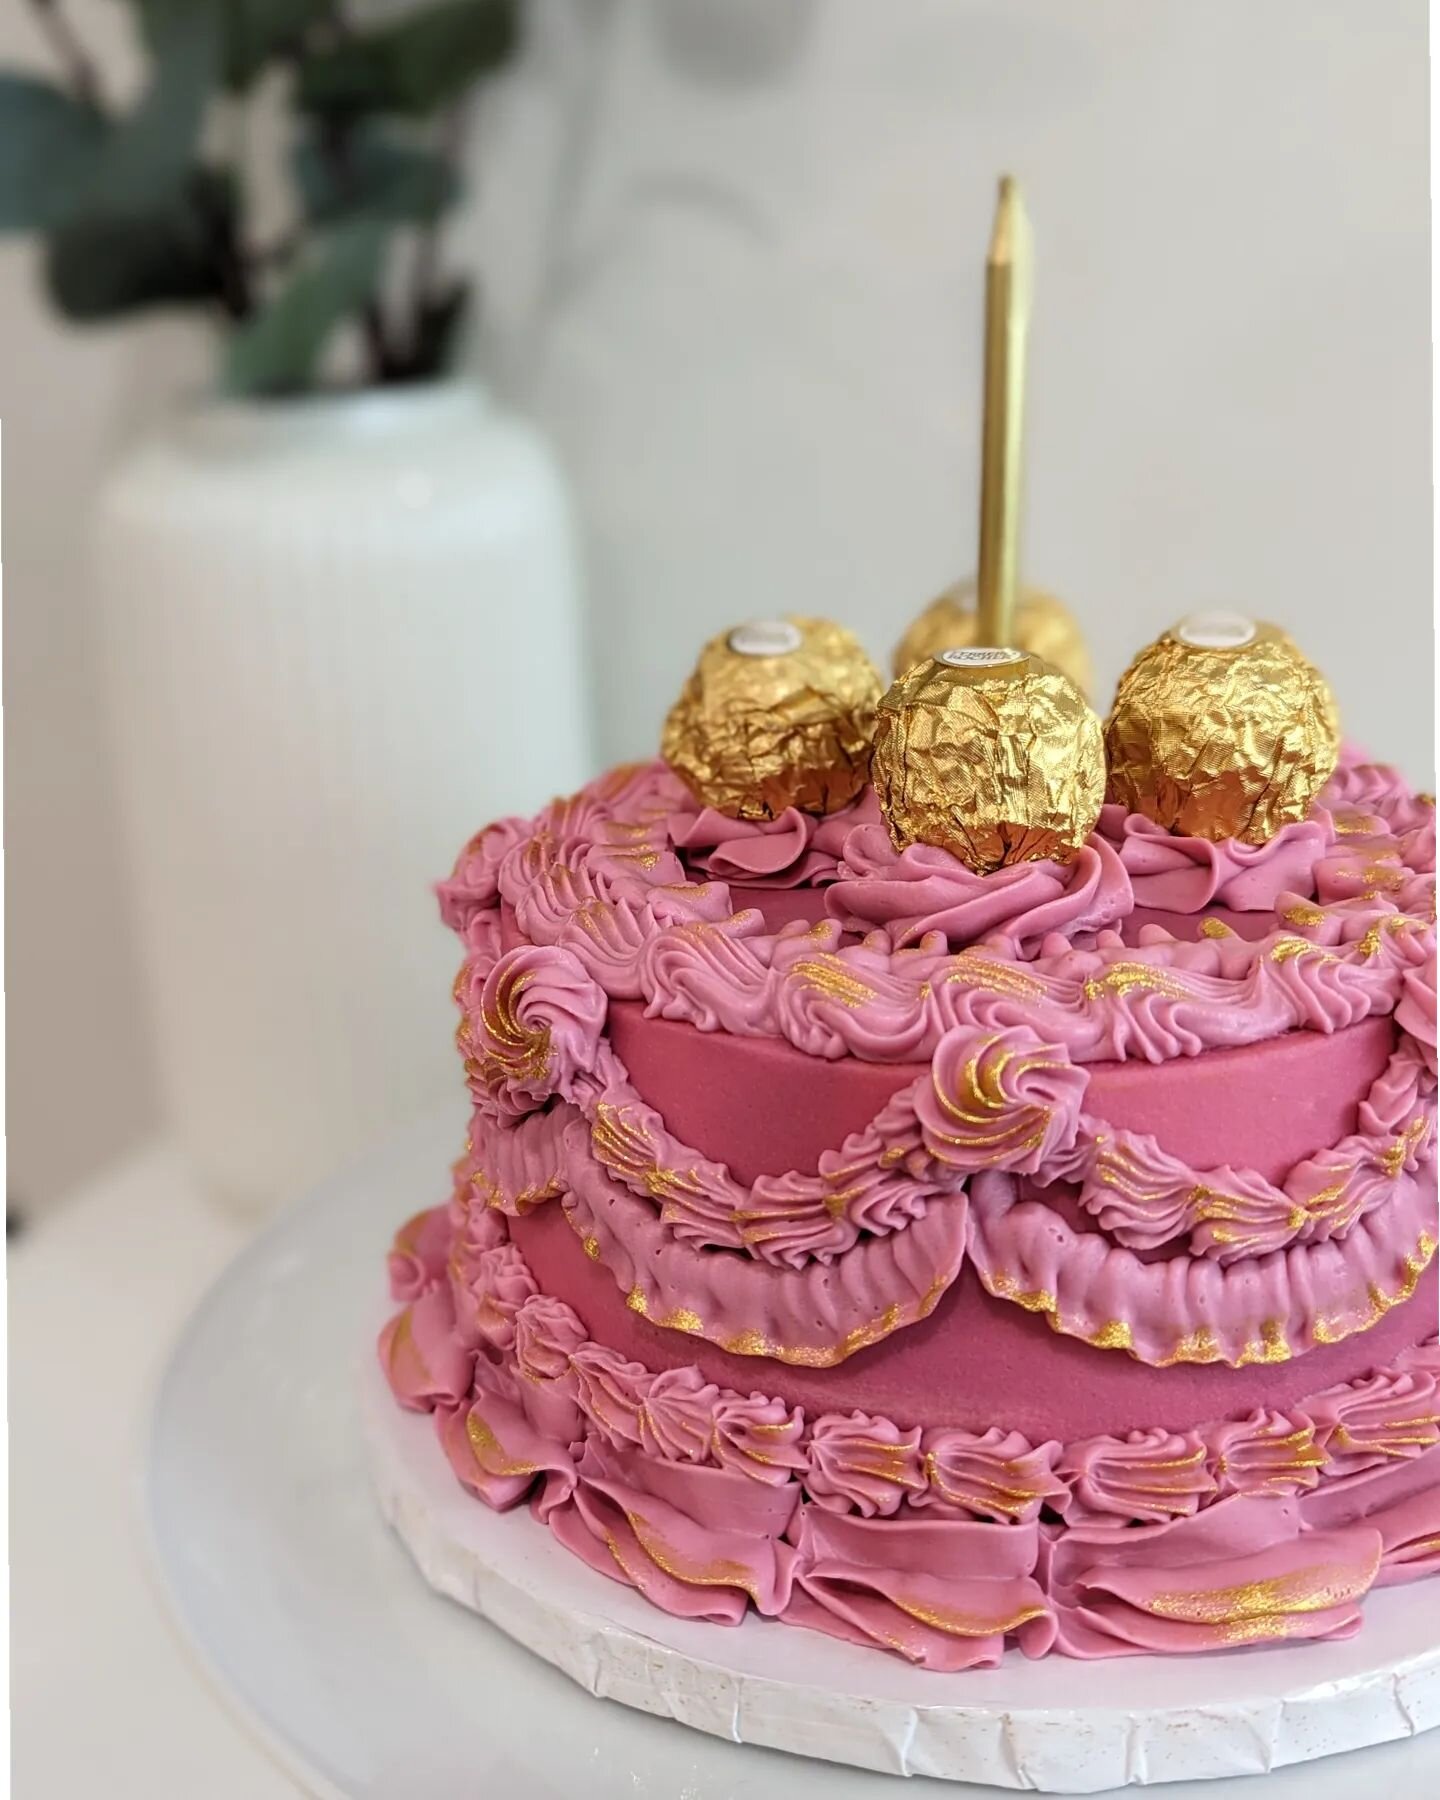 💞I was waiting to try out making a Lambeth style cake with yummy chocolate cake inside. This style is so grand and so beautiful, I finally got the chance to make my version of one for my parents 40th wedding anniversary! This is a small cake, so I c